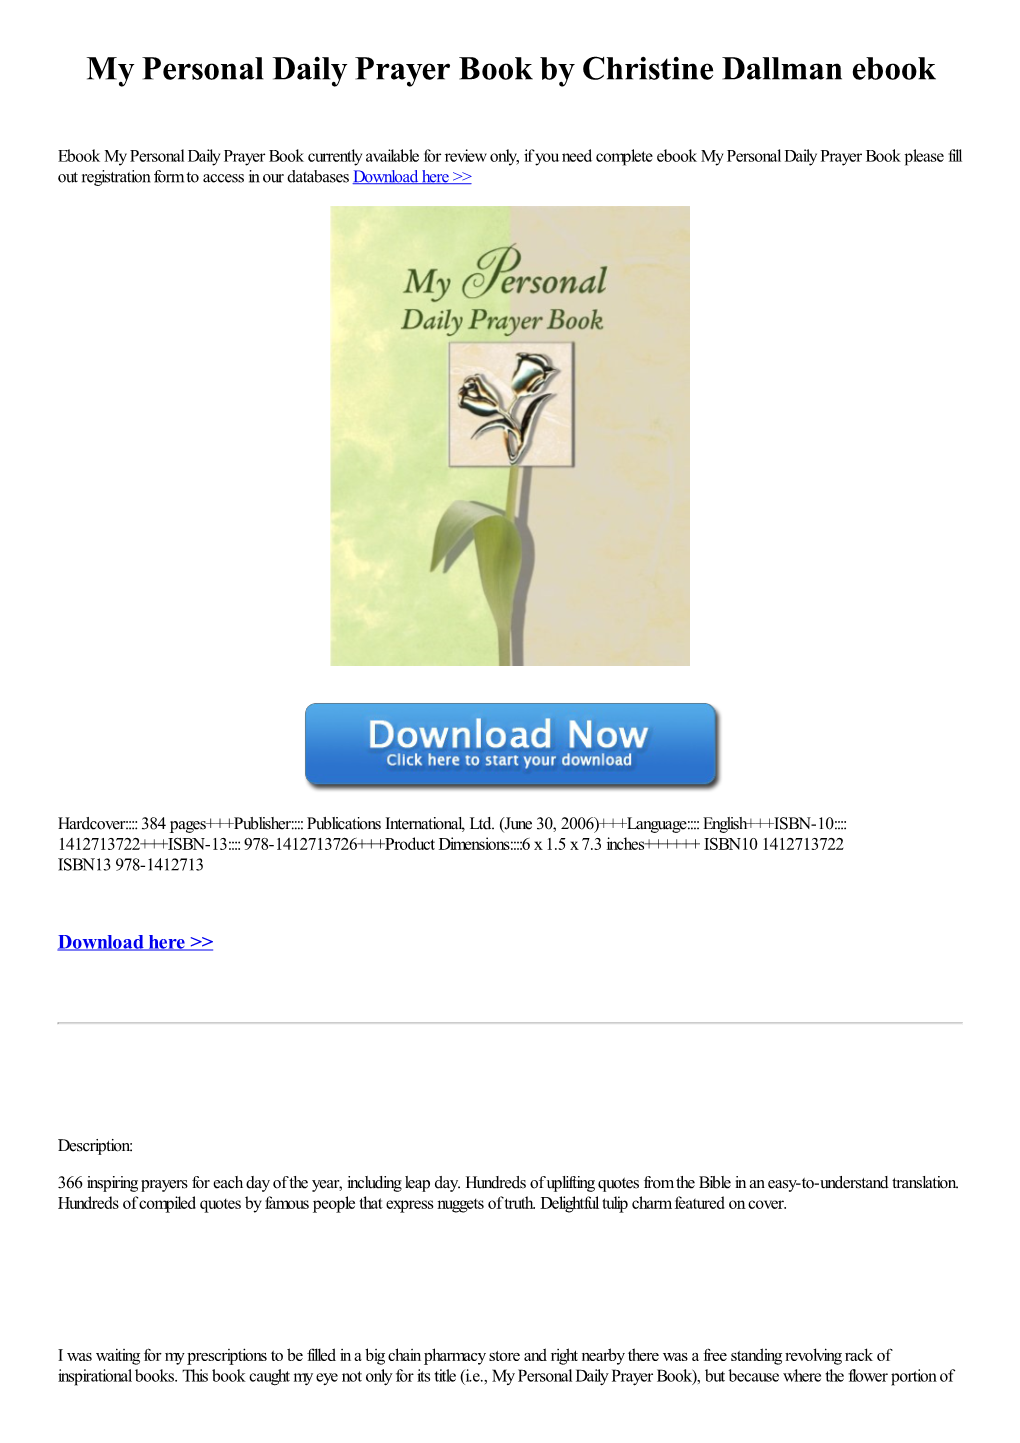 Download My Personal Daily Prayer Book by Christine Dallman